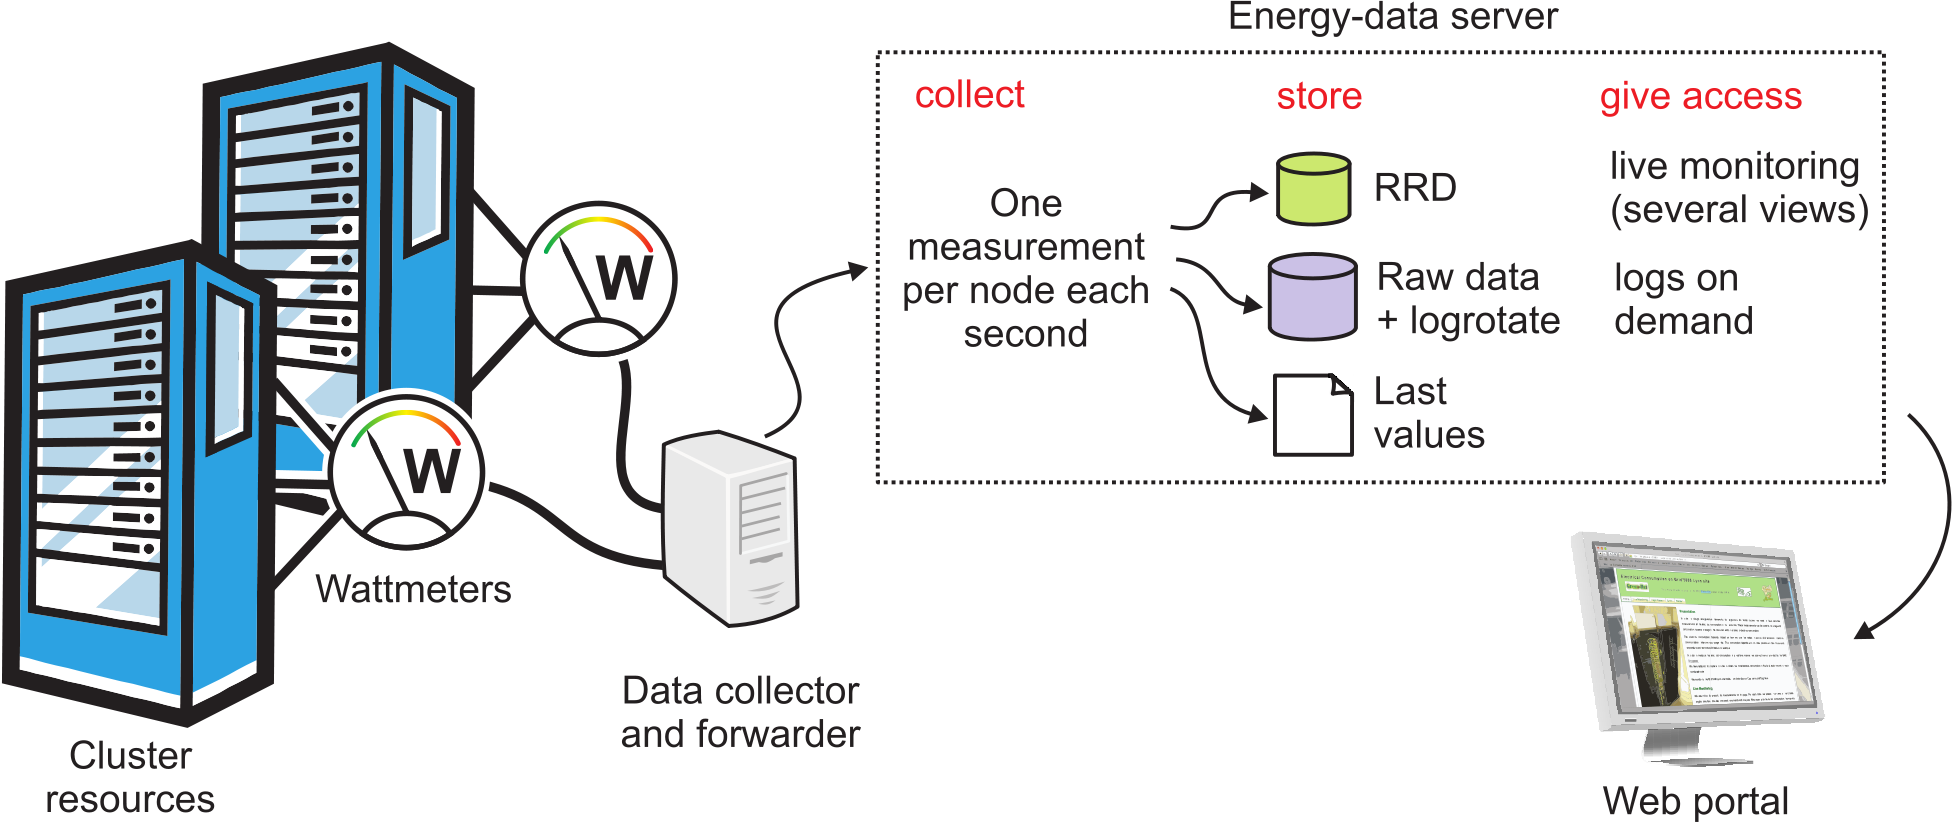 Cloud energy collect infrastructure